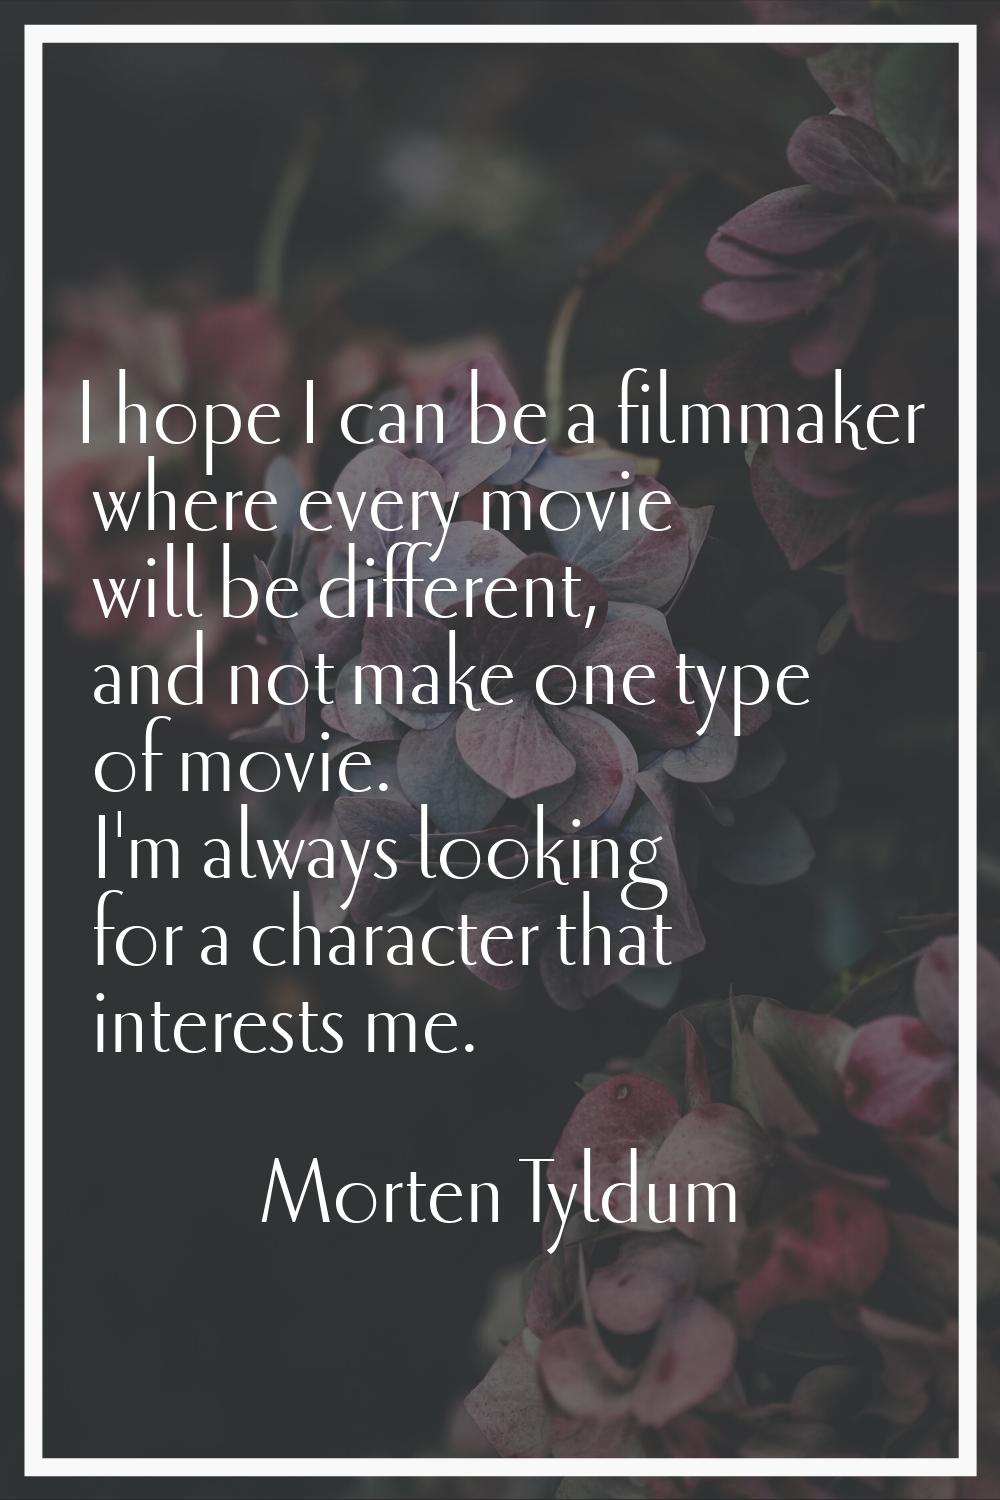 I hope I can be a filmmaker where every movie will be different, and not make one type of movie. I'